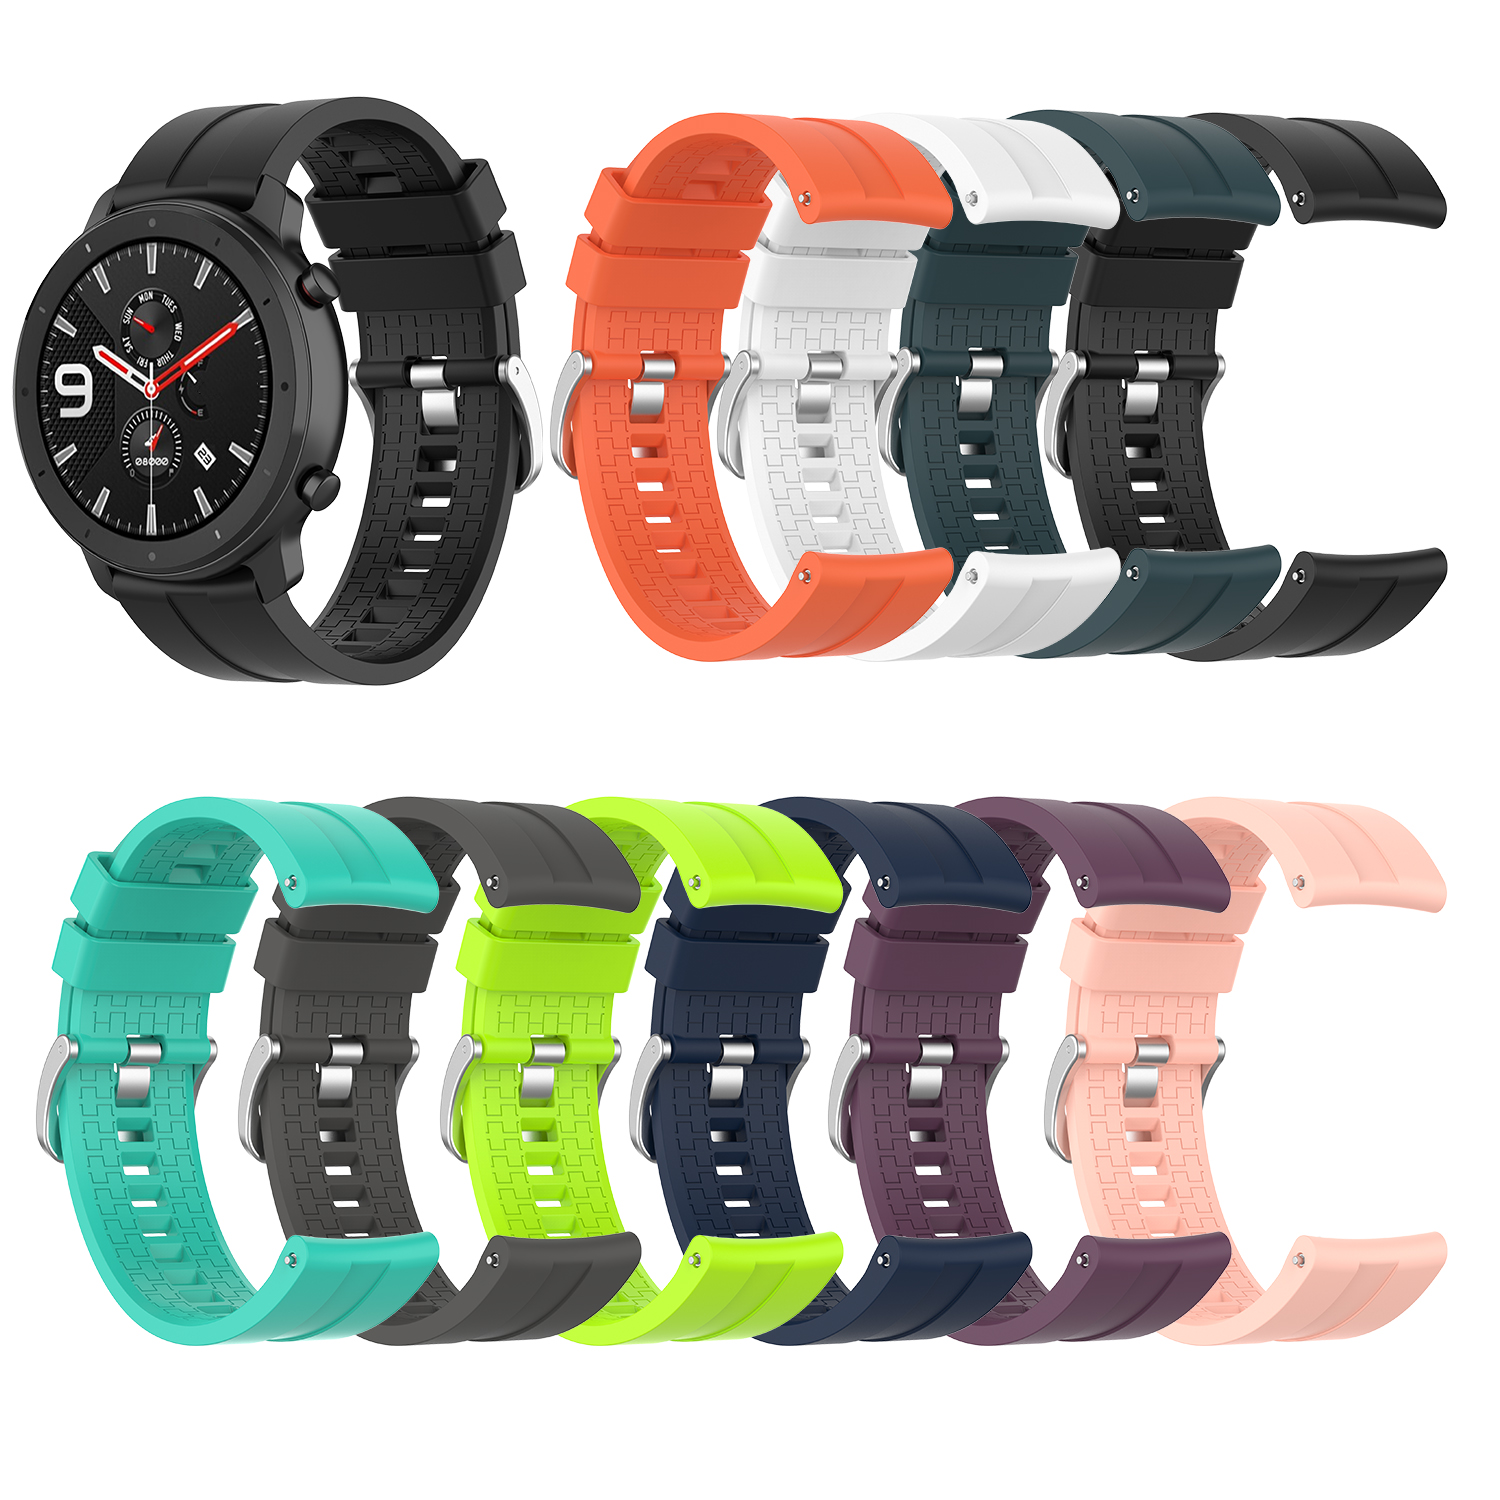 

Bakeey Silicone Watch Band Replacement Watch Strap for Amazfit GTR 47MM Smart Watch Non-original